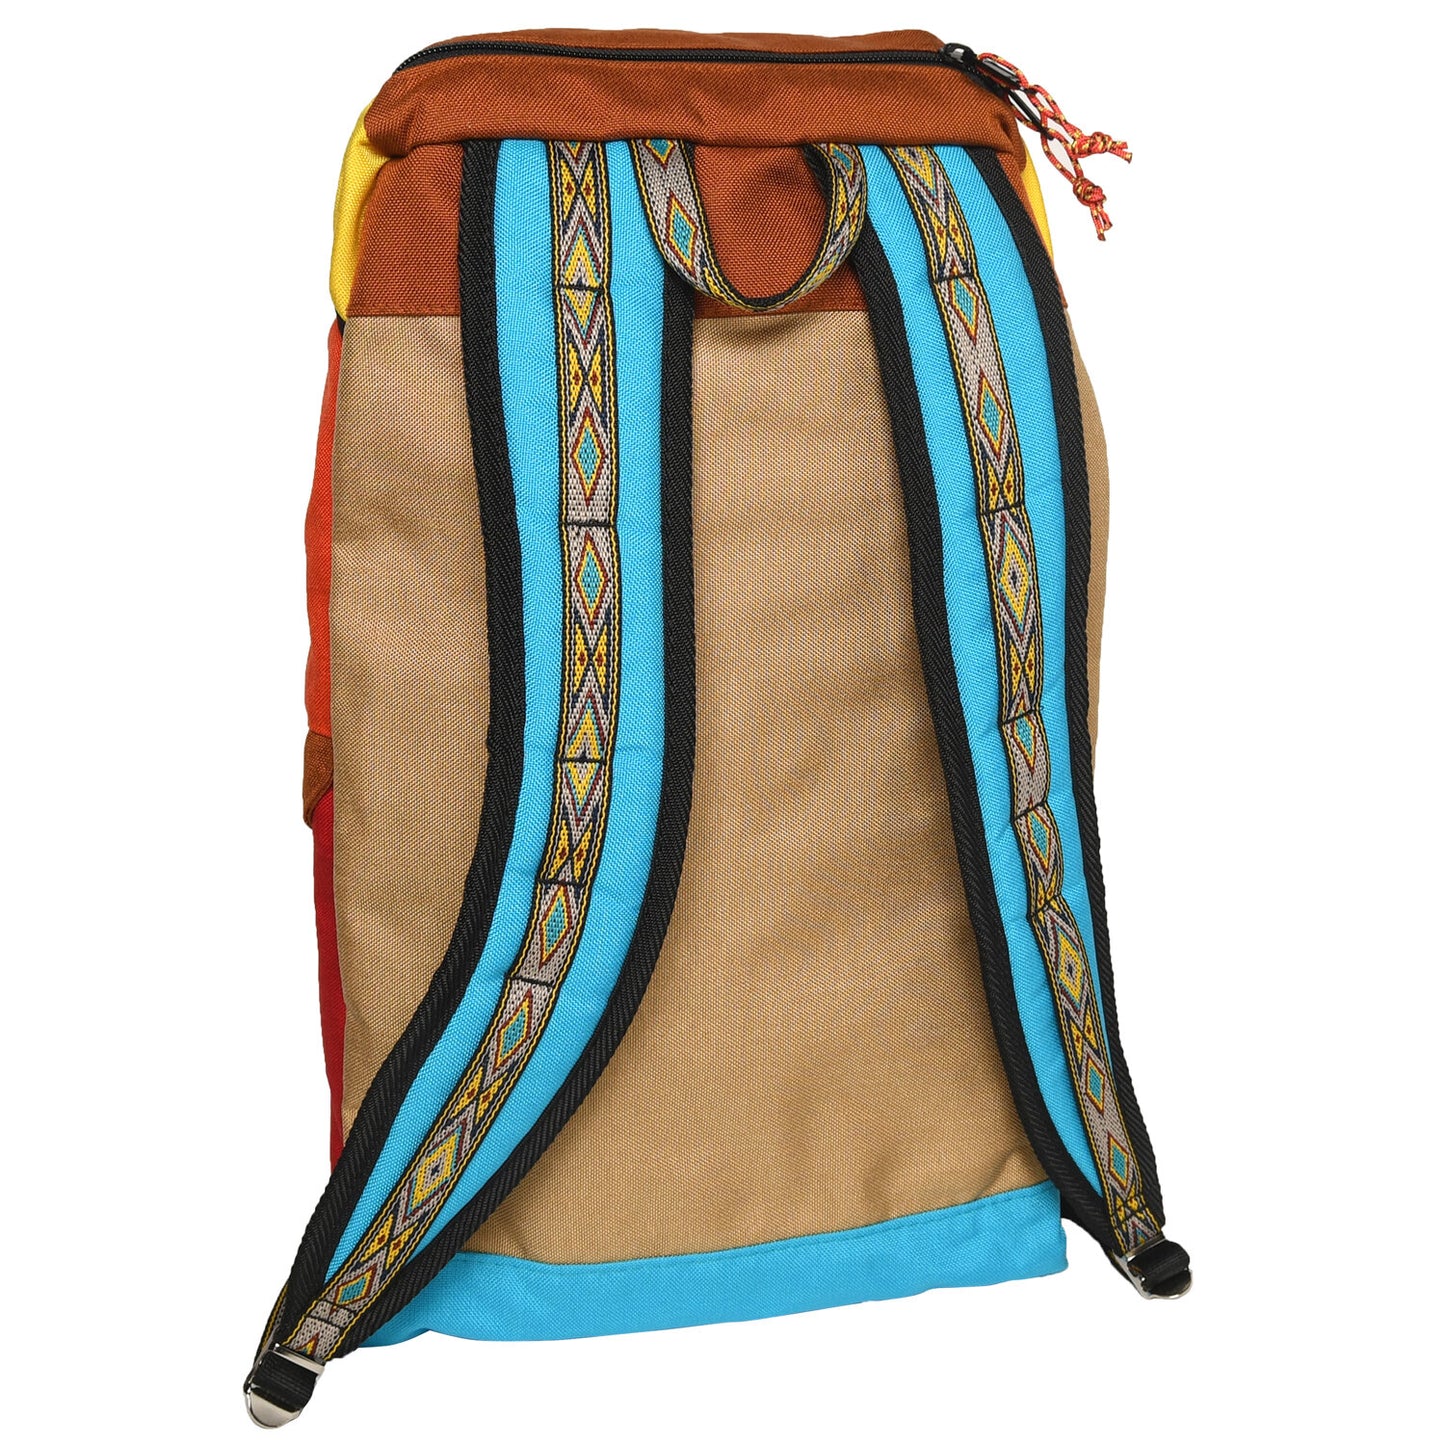 Epperson Mountaineering Medium Climb Pack, Clay / Sandstone